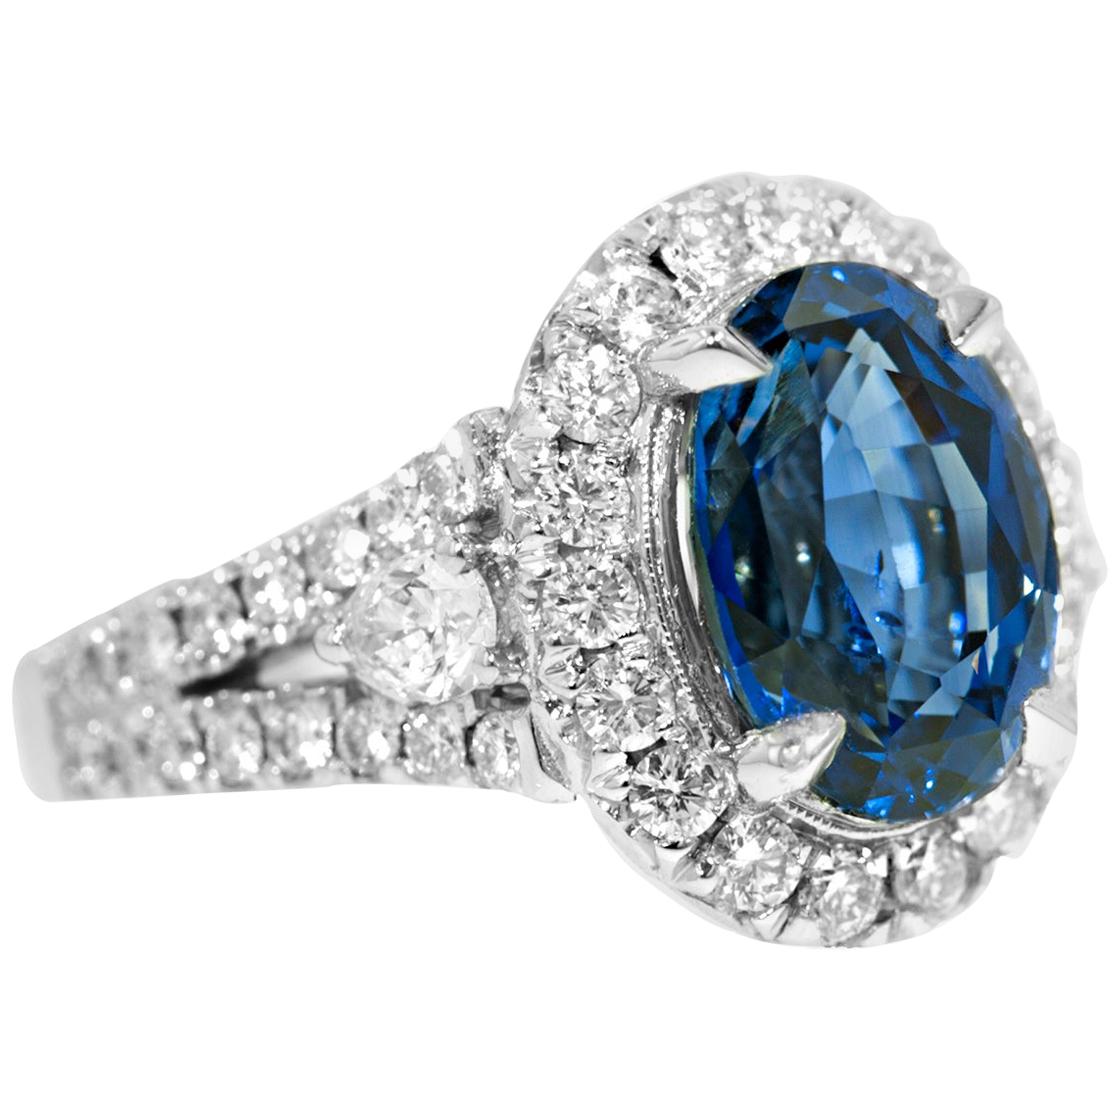 5.60 Carat Oval Blue Sapphire and Diamonds Fashion Ring in 18 Karat White Gold